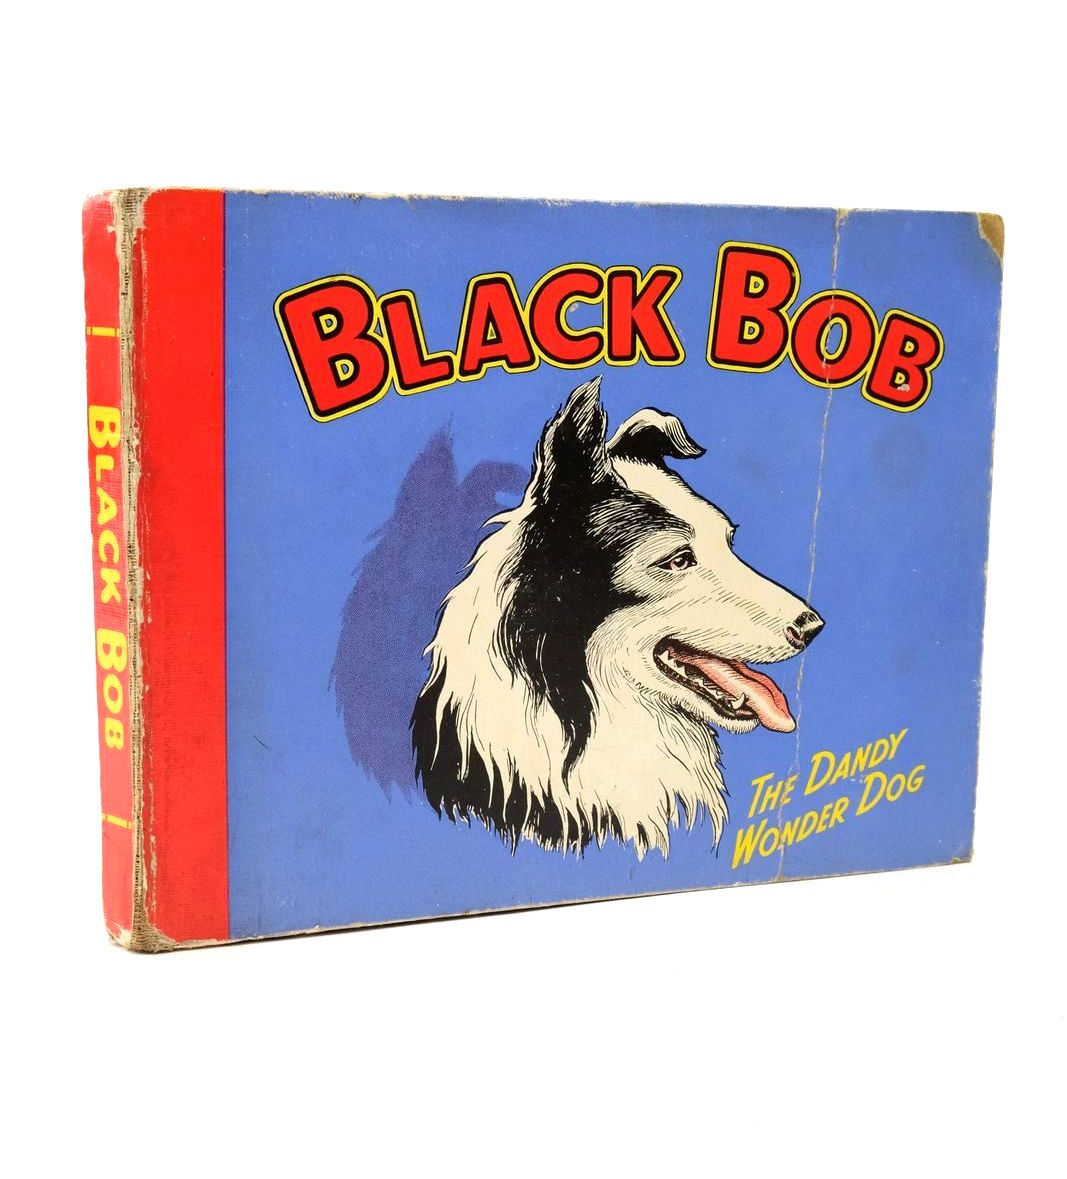 Photo of BLACK BOB THE DANDY WONDER DOG 1951 illustrated by Prout, Jack published by D.C. Thomson &amp; Co Ltd. (STOCK CODE: 1322726)  for sale by Stella & Rose's Books